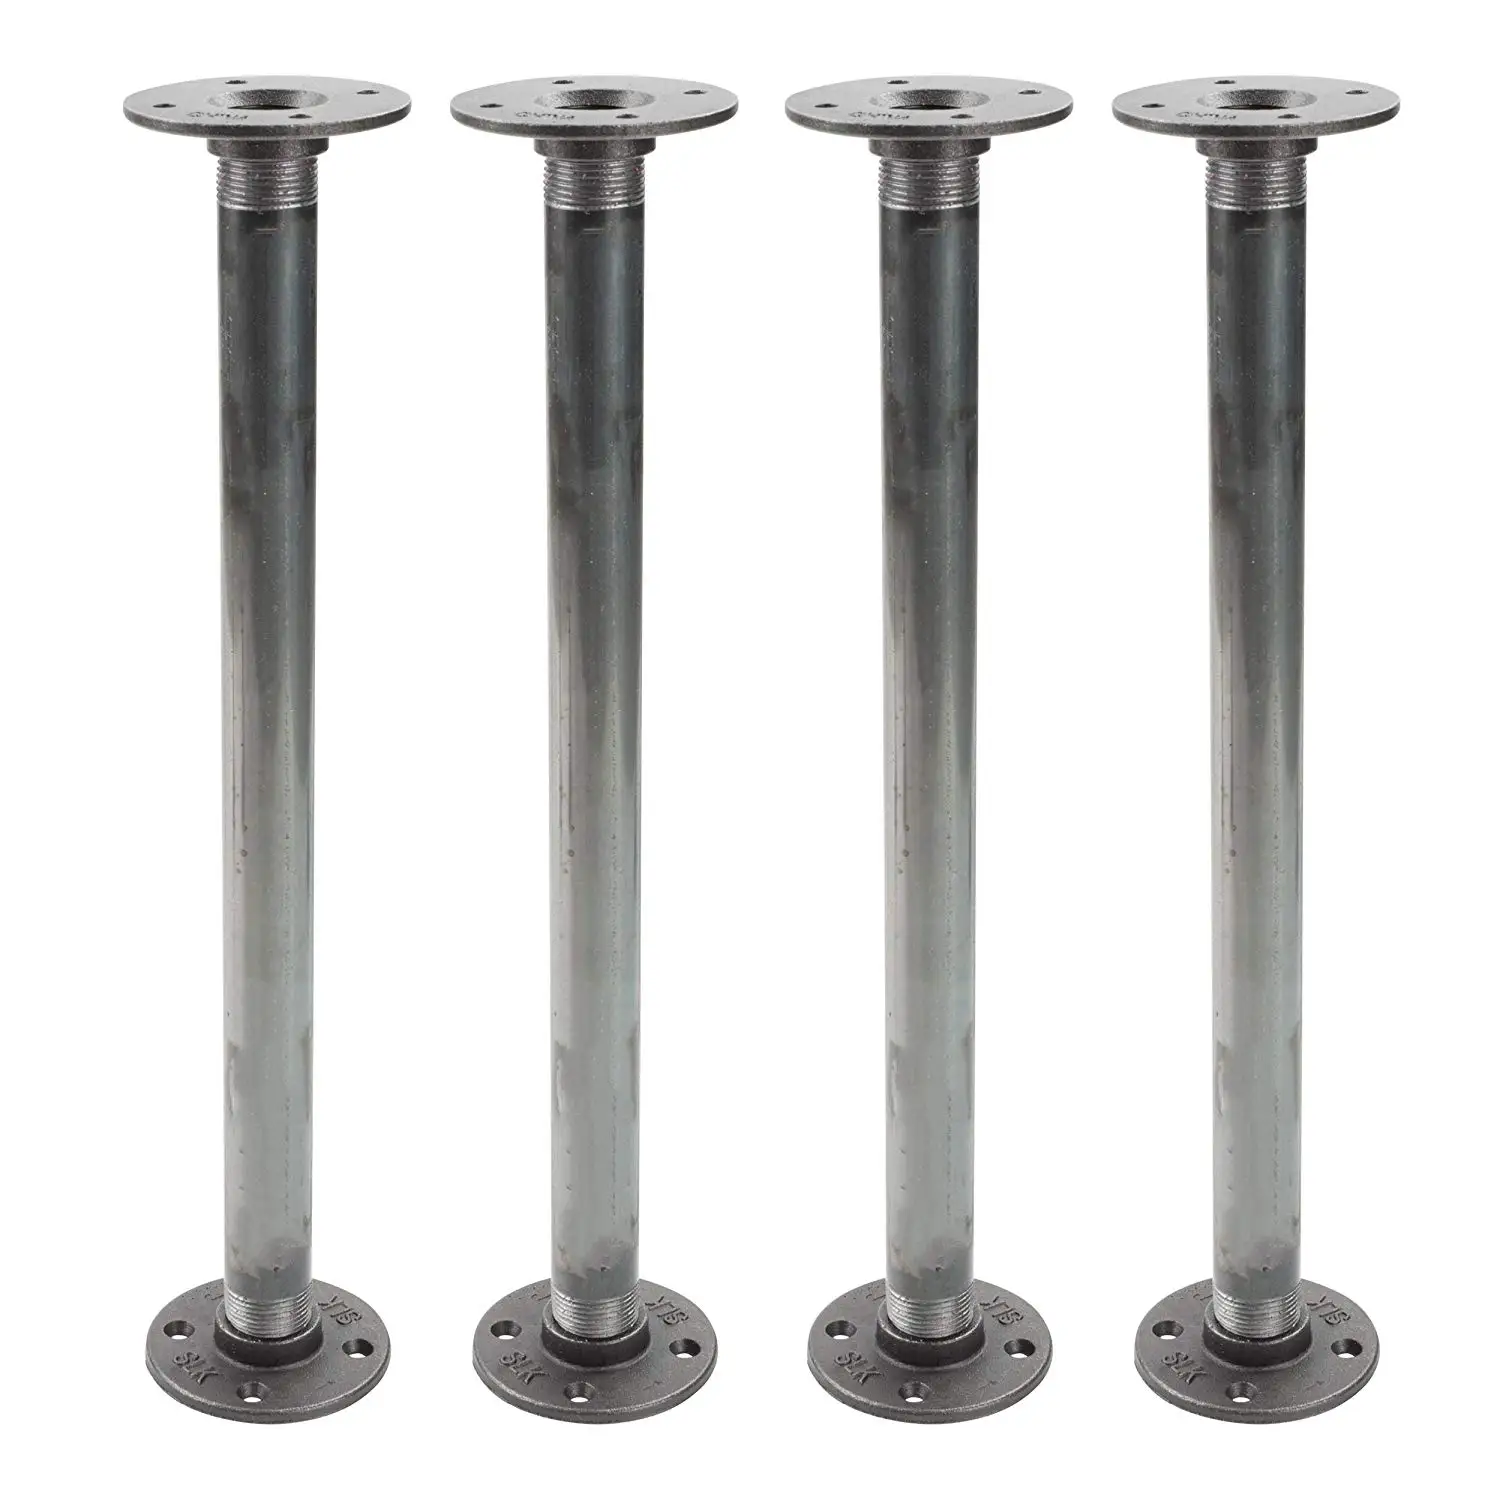 Buy Rustic 17 inch Industrial Pipe Decor Table Legs Set